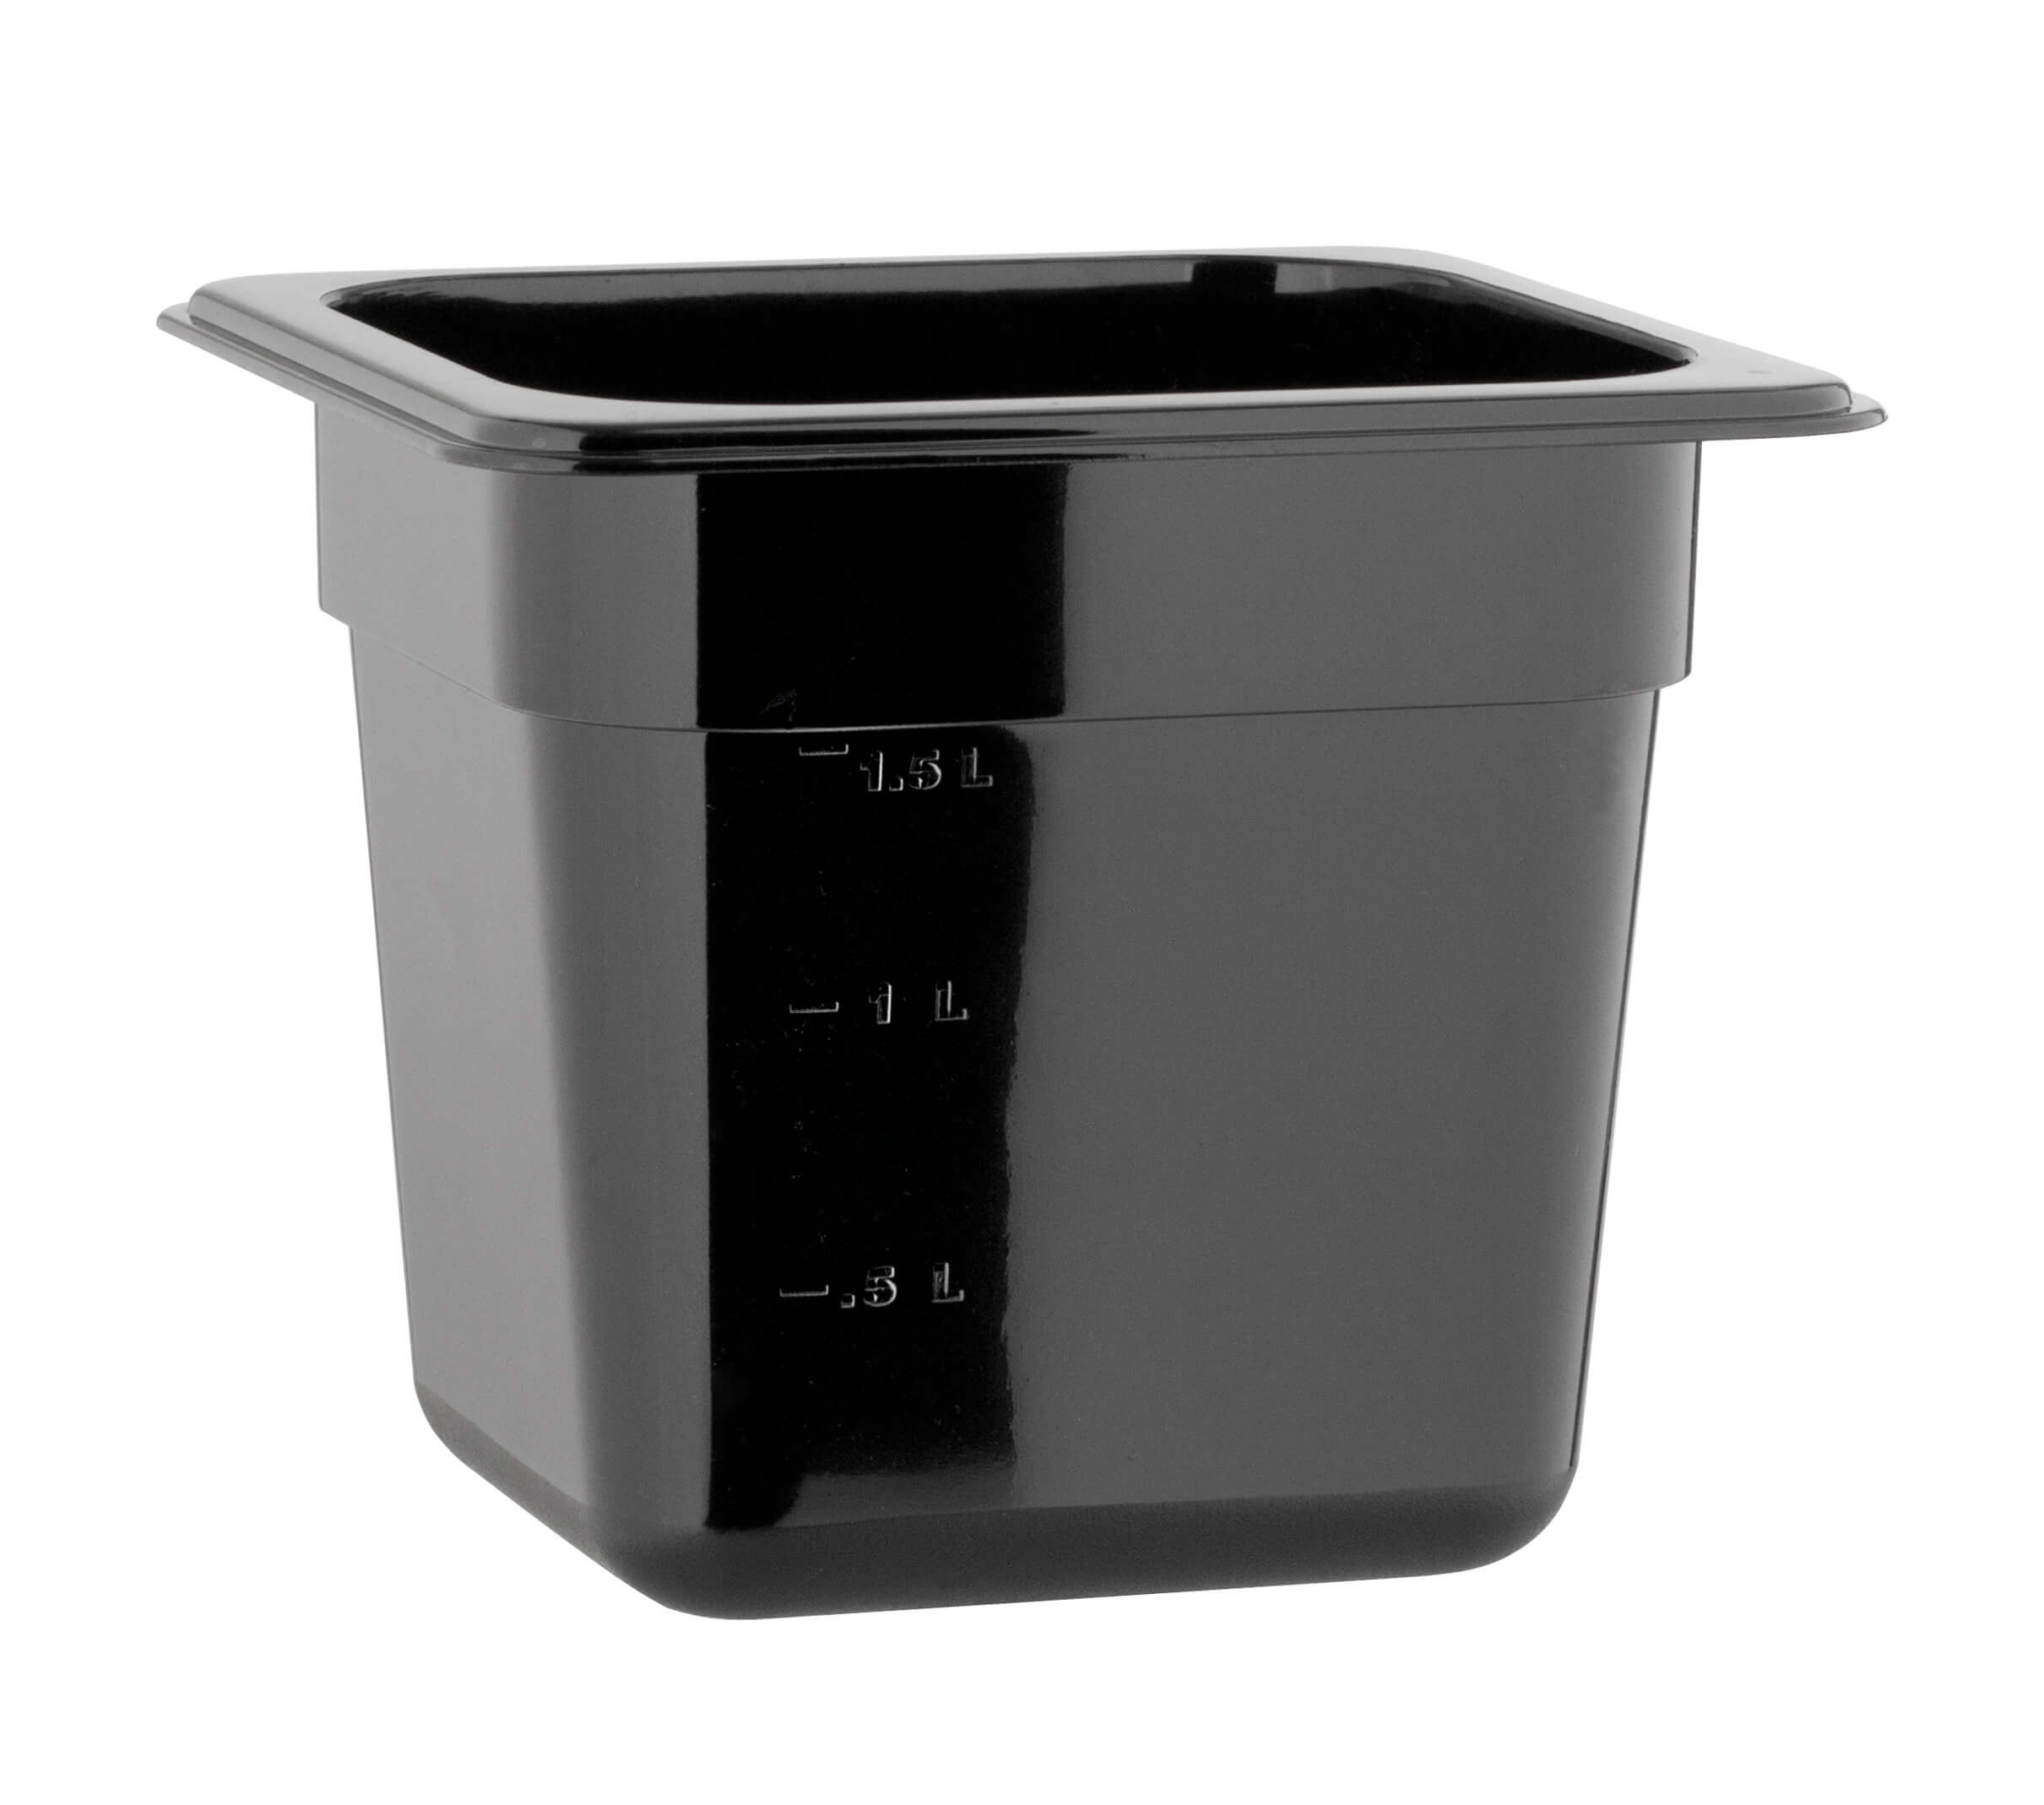 Gastronomy-standard container 150mm depth - plastic (GN 1/6)